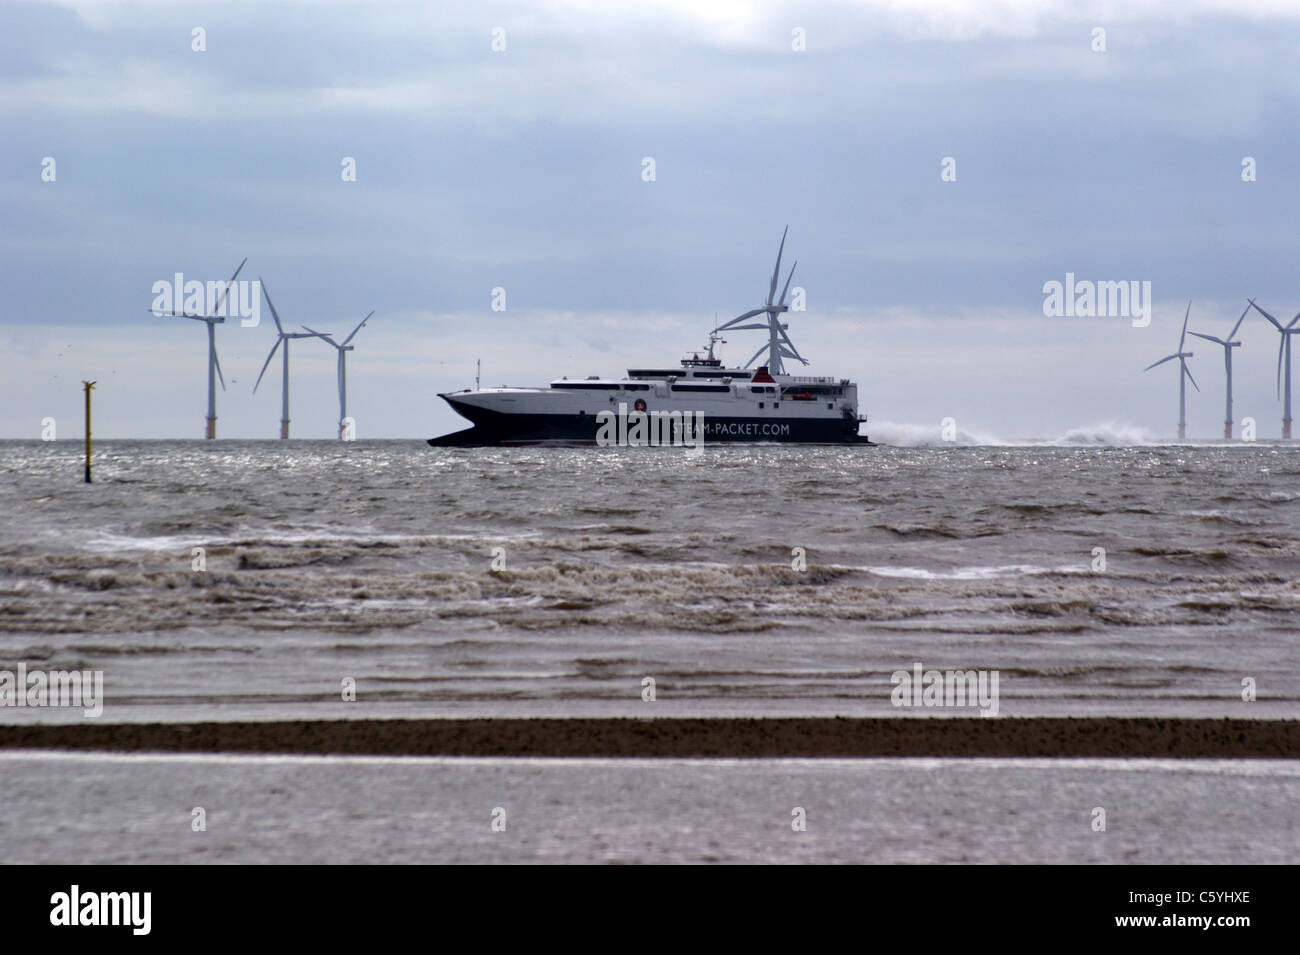 The Isle of Man ferry seen from Crosby beach, Liverpool, Merseyside, England, Liverpool wind farm in the background Stock Photo